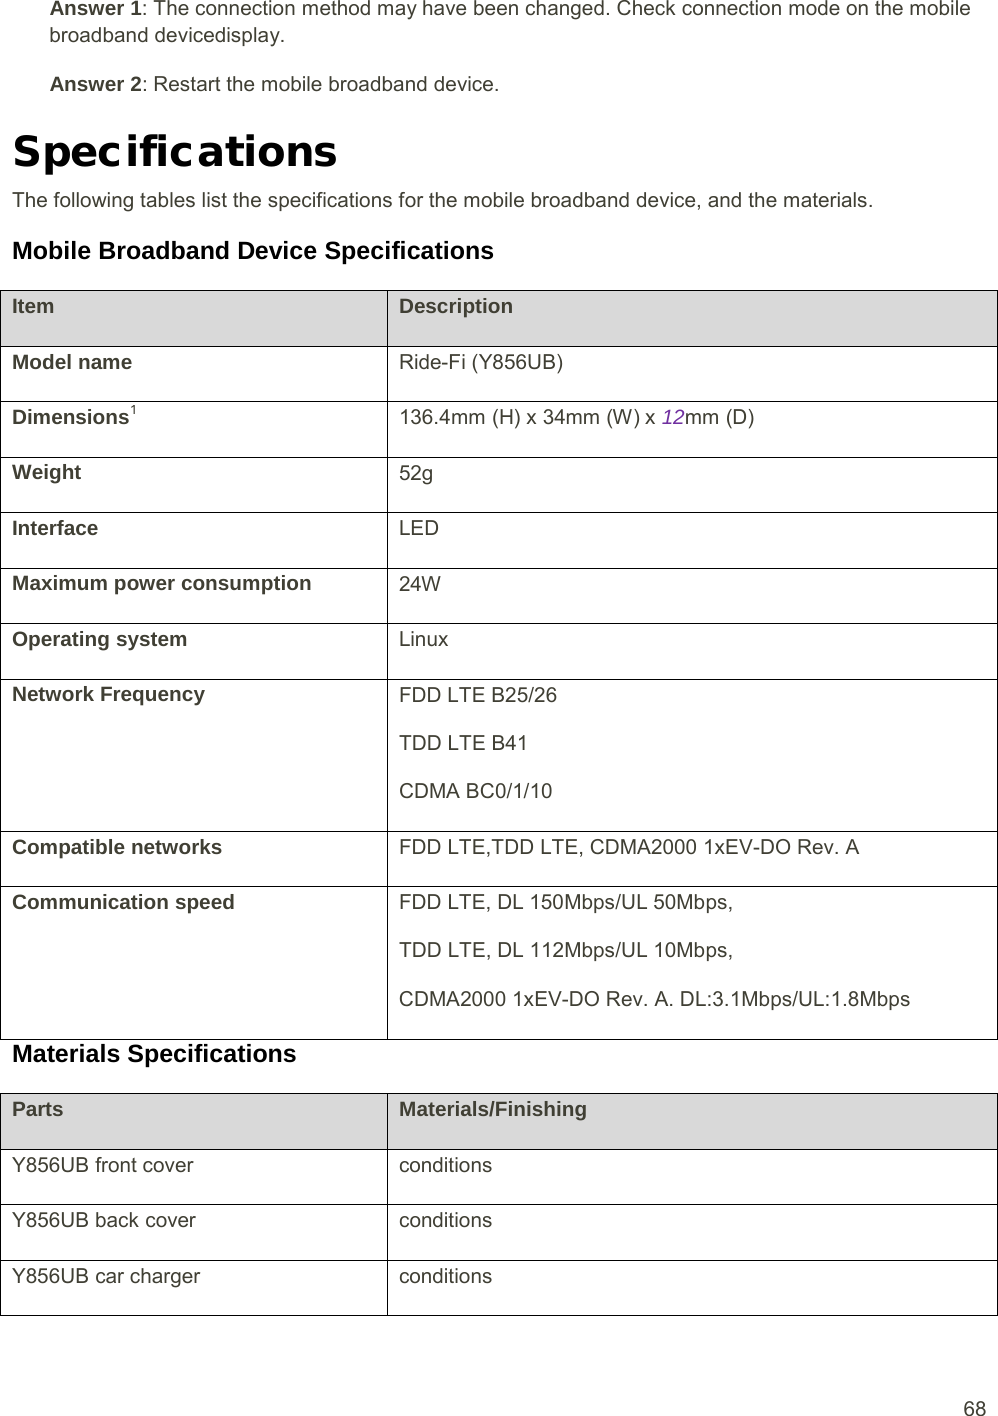  68 Answer 1: The connection method may have been changed. Check connection mode on the mobile broadband devicedisplay. Answer 2Specifications : Restart the mobile broadband device. The following tables list the specifications for the mobile broadband device, and the materials. Mobile Broadband Device Specifications Item Description Ride-Fi (Y856UB) Model name Dimensions136.4mm (H) x 34mm (W) x 1 12mm (D) 52g Weight LED Interface 24W Maximum power consumption Linux Operating system FDD LTE B25/26 TDD LTE B41 CDMA BC0/1/10 Network Frequency FDD LTE,TDD LTE, CDMA2000 1xEV-DO Rev. A Compatible networks FDD LTE, DL 150Mbps/UL 50Mbps, TDD LTE, DL 112Mbps/UL 10Mbps, CDMA2000 1xEV-DO Rev. A. DL:3.1Mbps/UL:1.8Mbps Communication speed Materials Specifications Parts Materials/Finishing Y856UB front cover conditions Y856UB back cover conditions Y856UB car charger conditions 